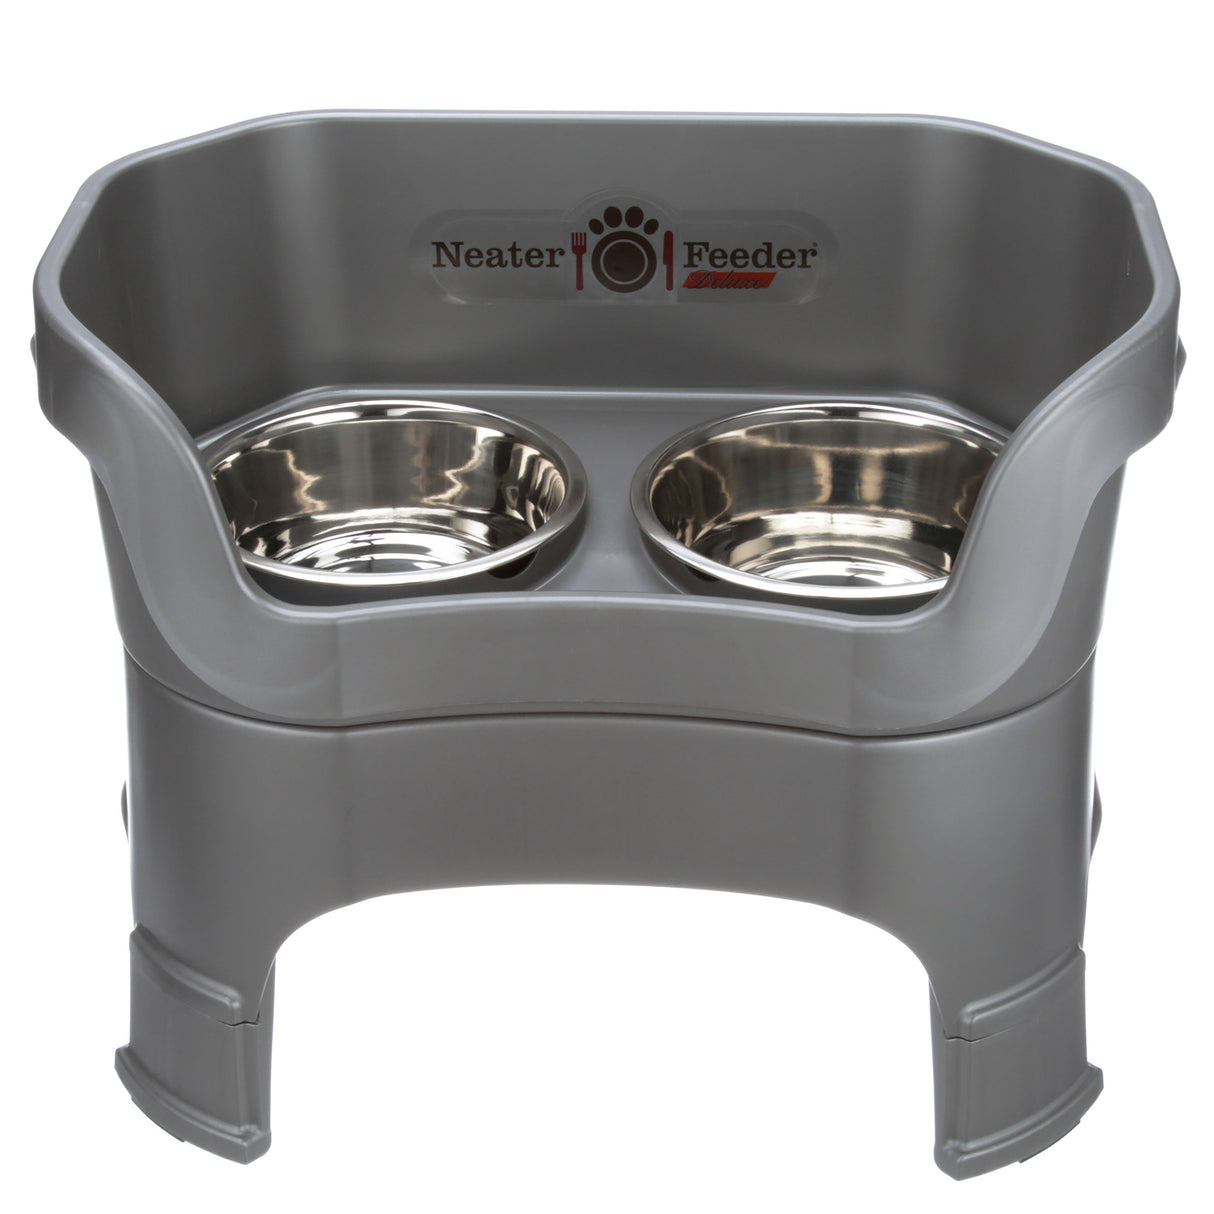 Deluxe Large Neater Feeder with leg extensions in Gunmetal Grey